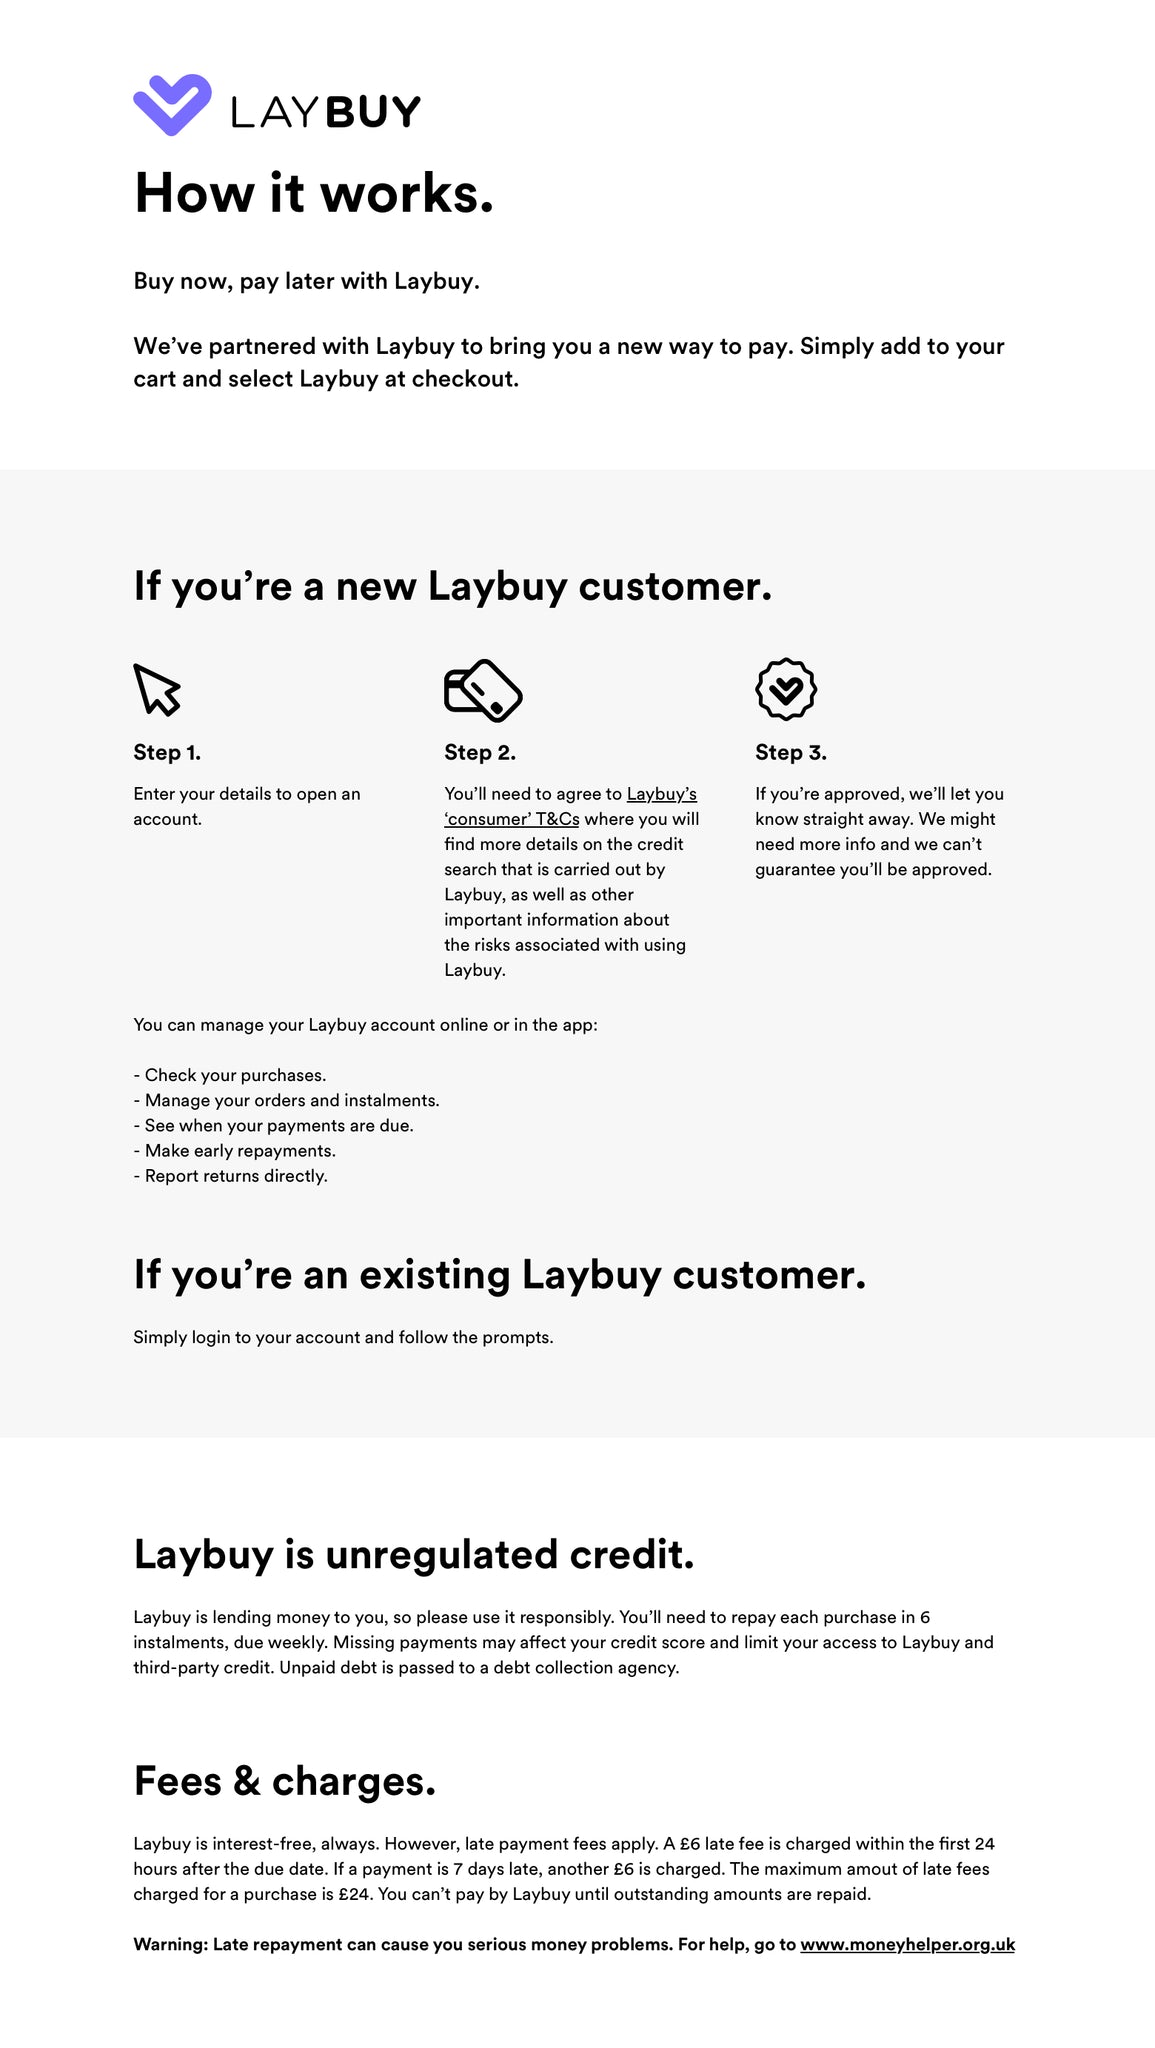 What is Laybuy?